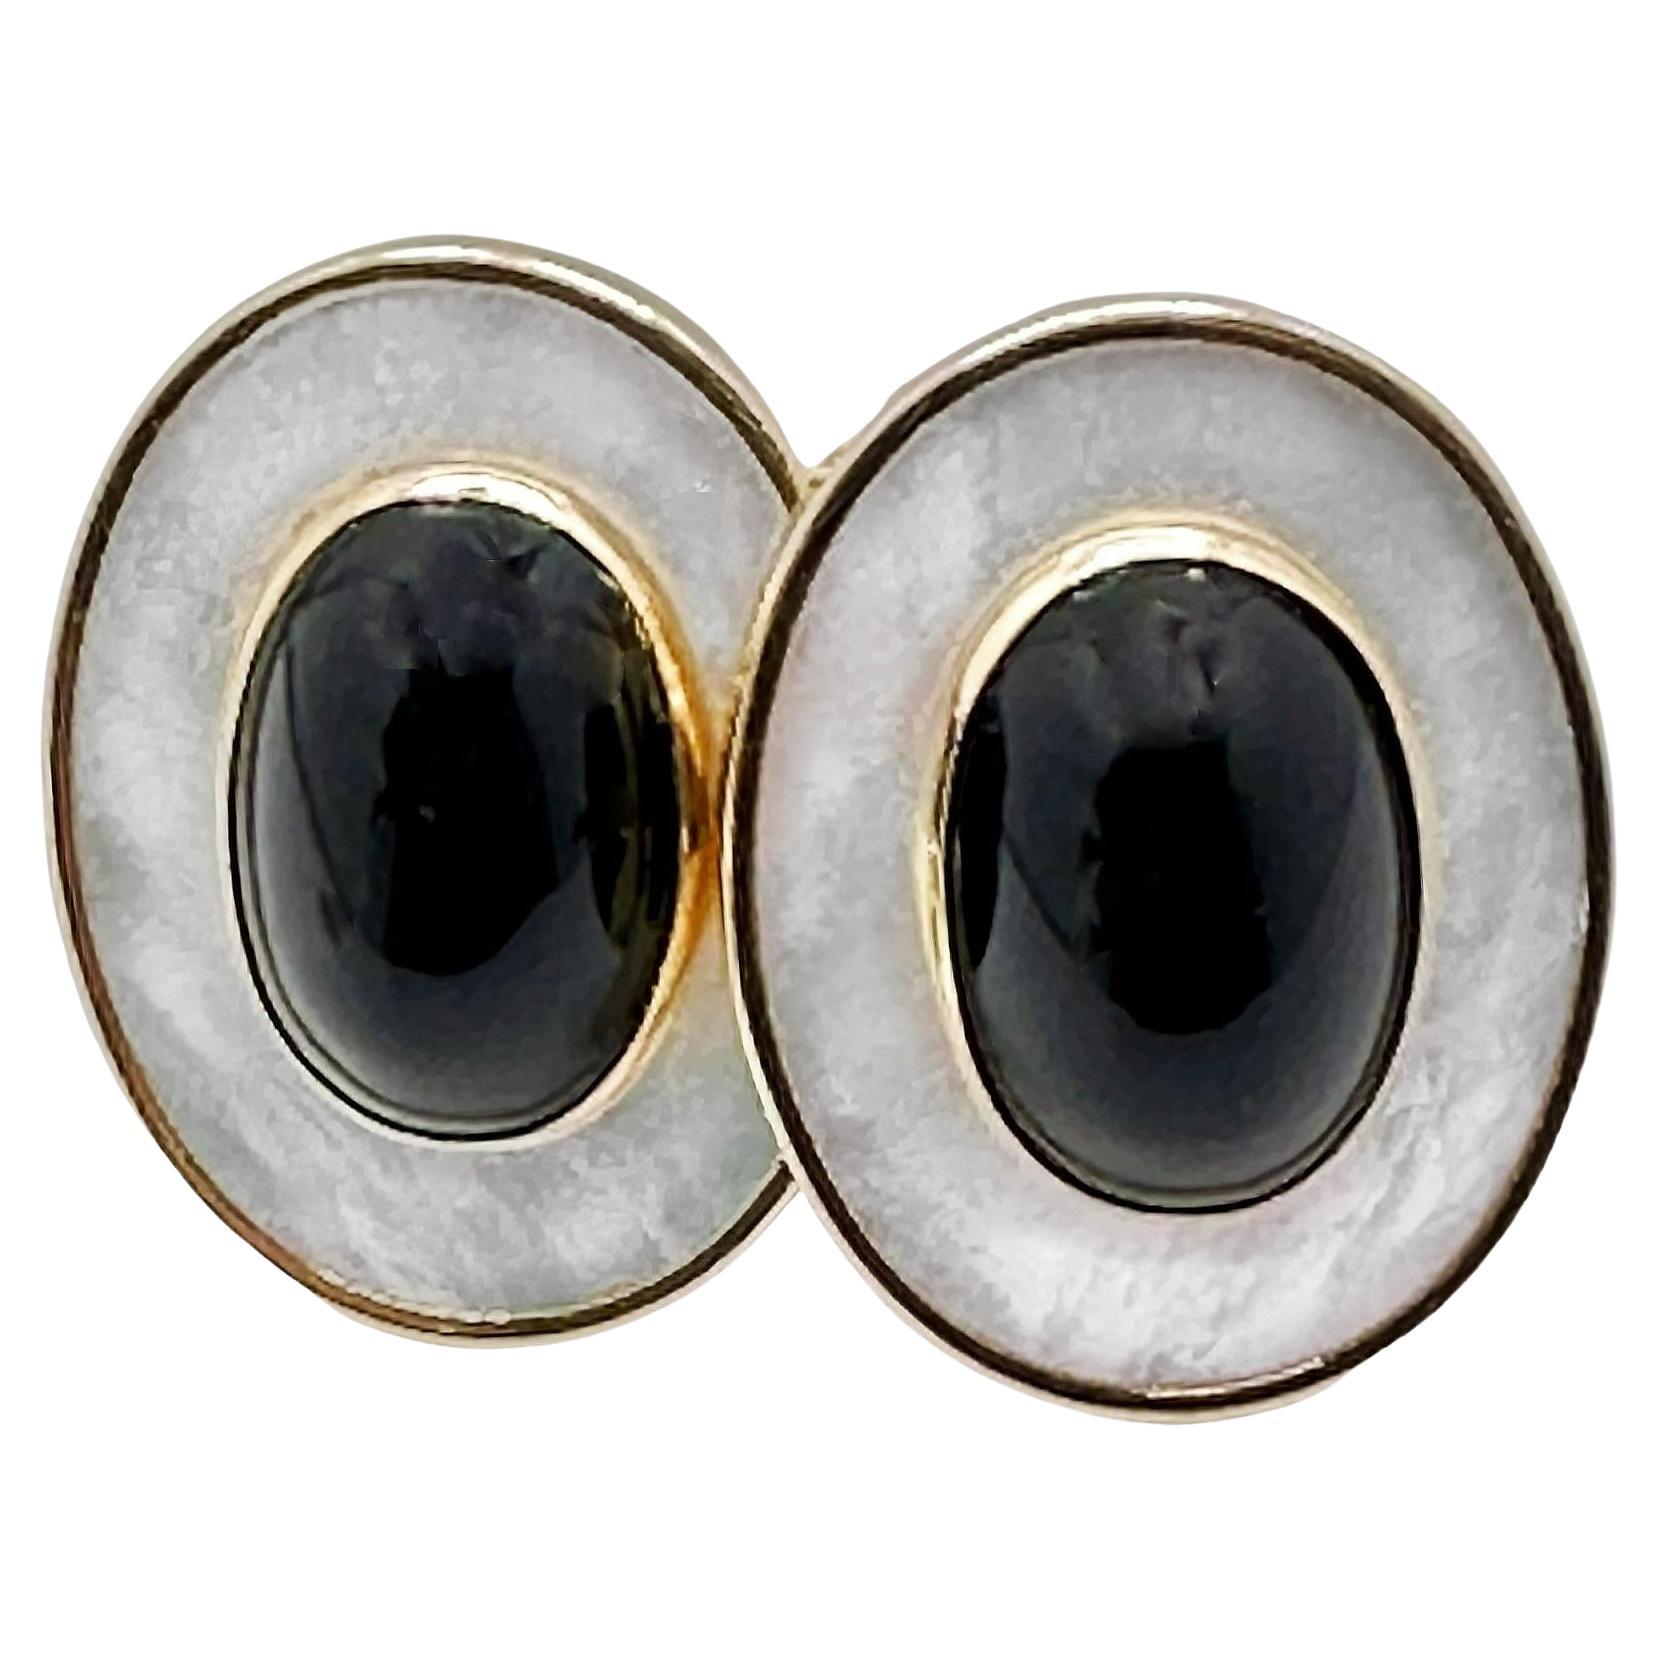 Gold, Mother of Pearl, and Onyx, Oval Shaped Earrings by Peter Brams Designs For Sale